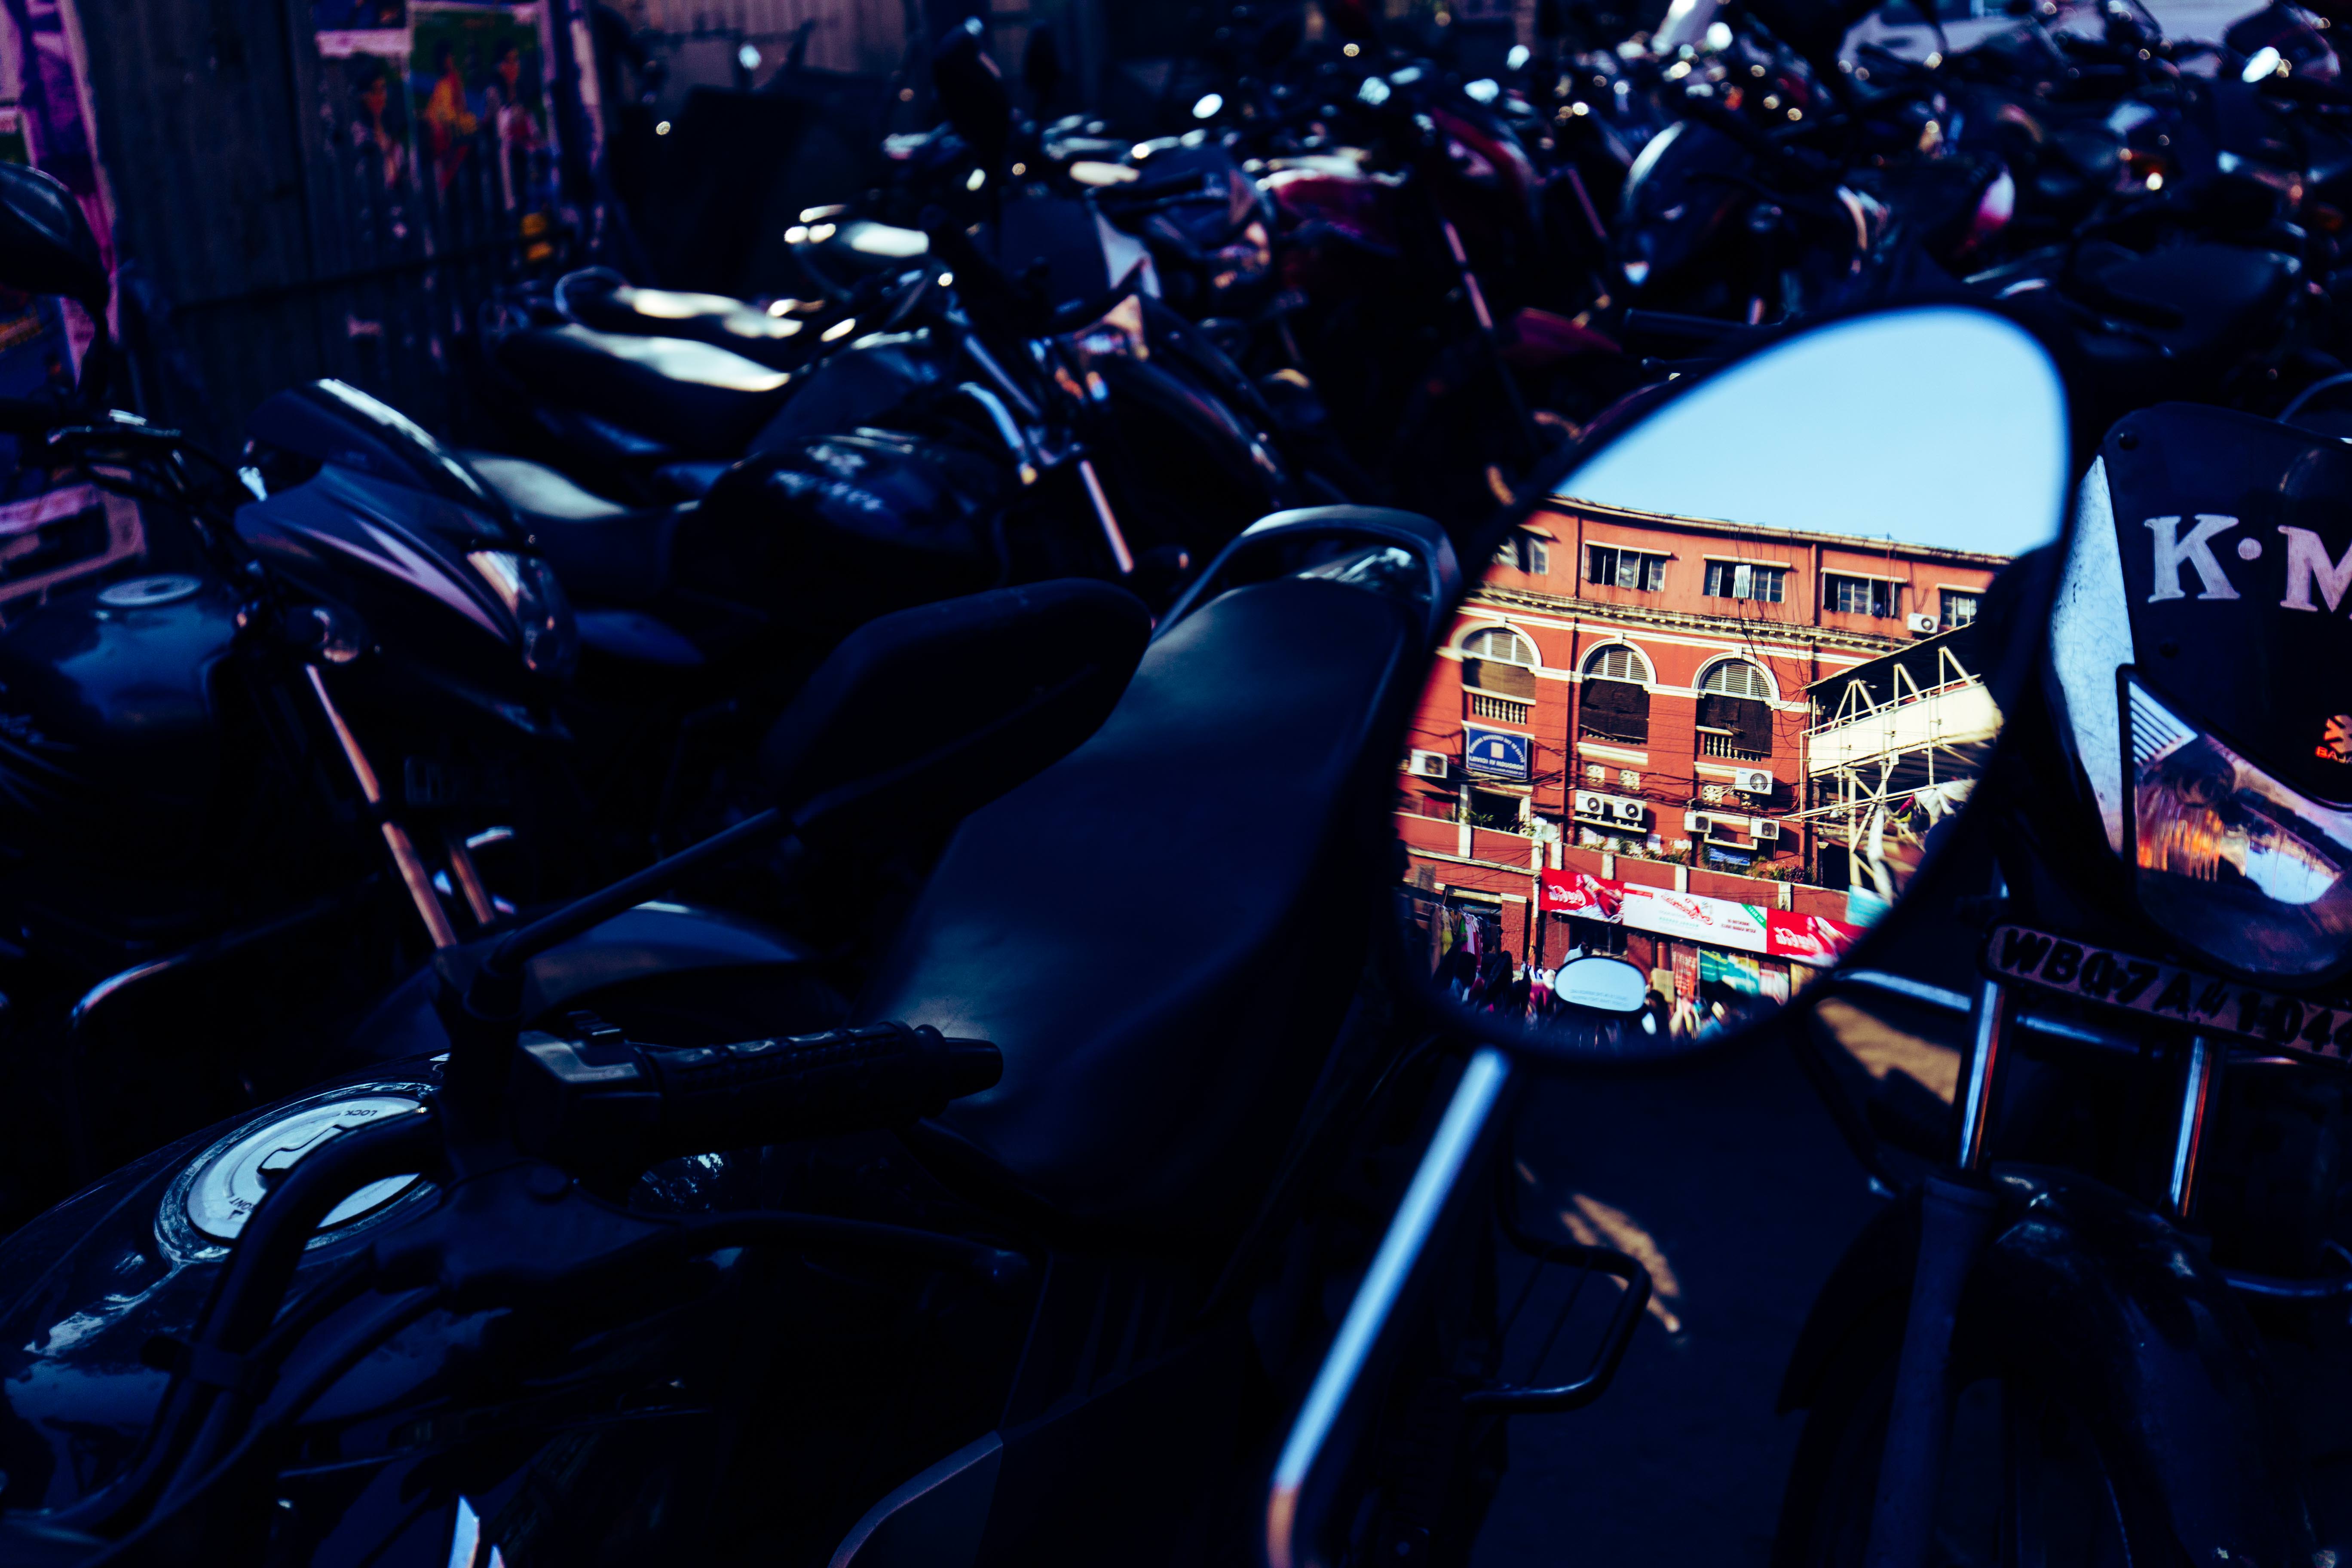 A brief reflection into the history of Kolkata near a Hog Market motorcycle stand, where one can observe the remnants of the long-gone British rule or Raj, in the very distinct form of red brick buildings which serve as government offices even today.